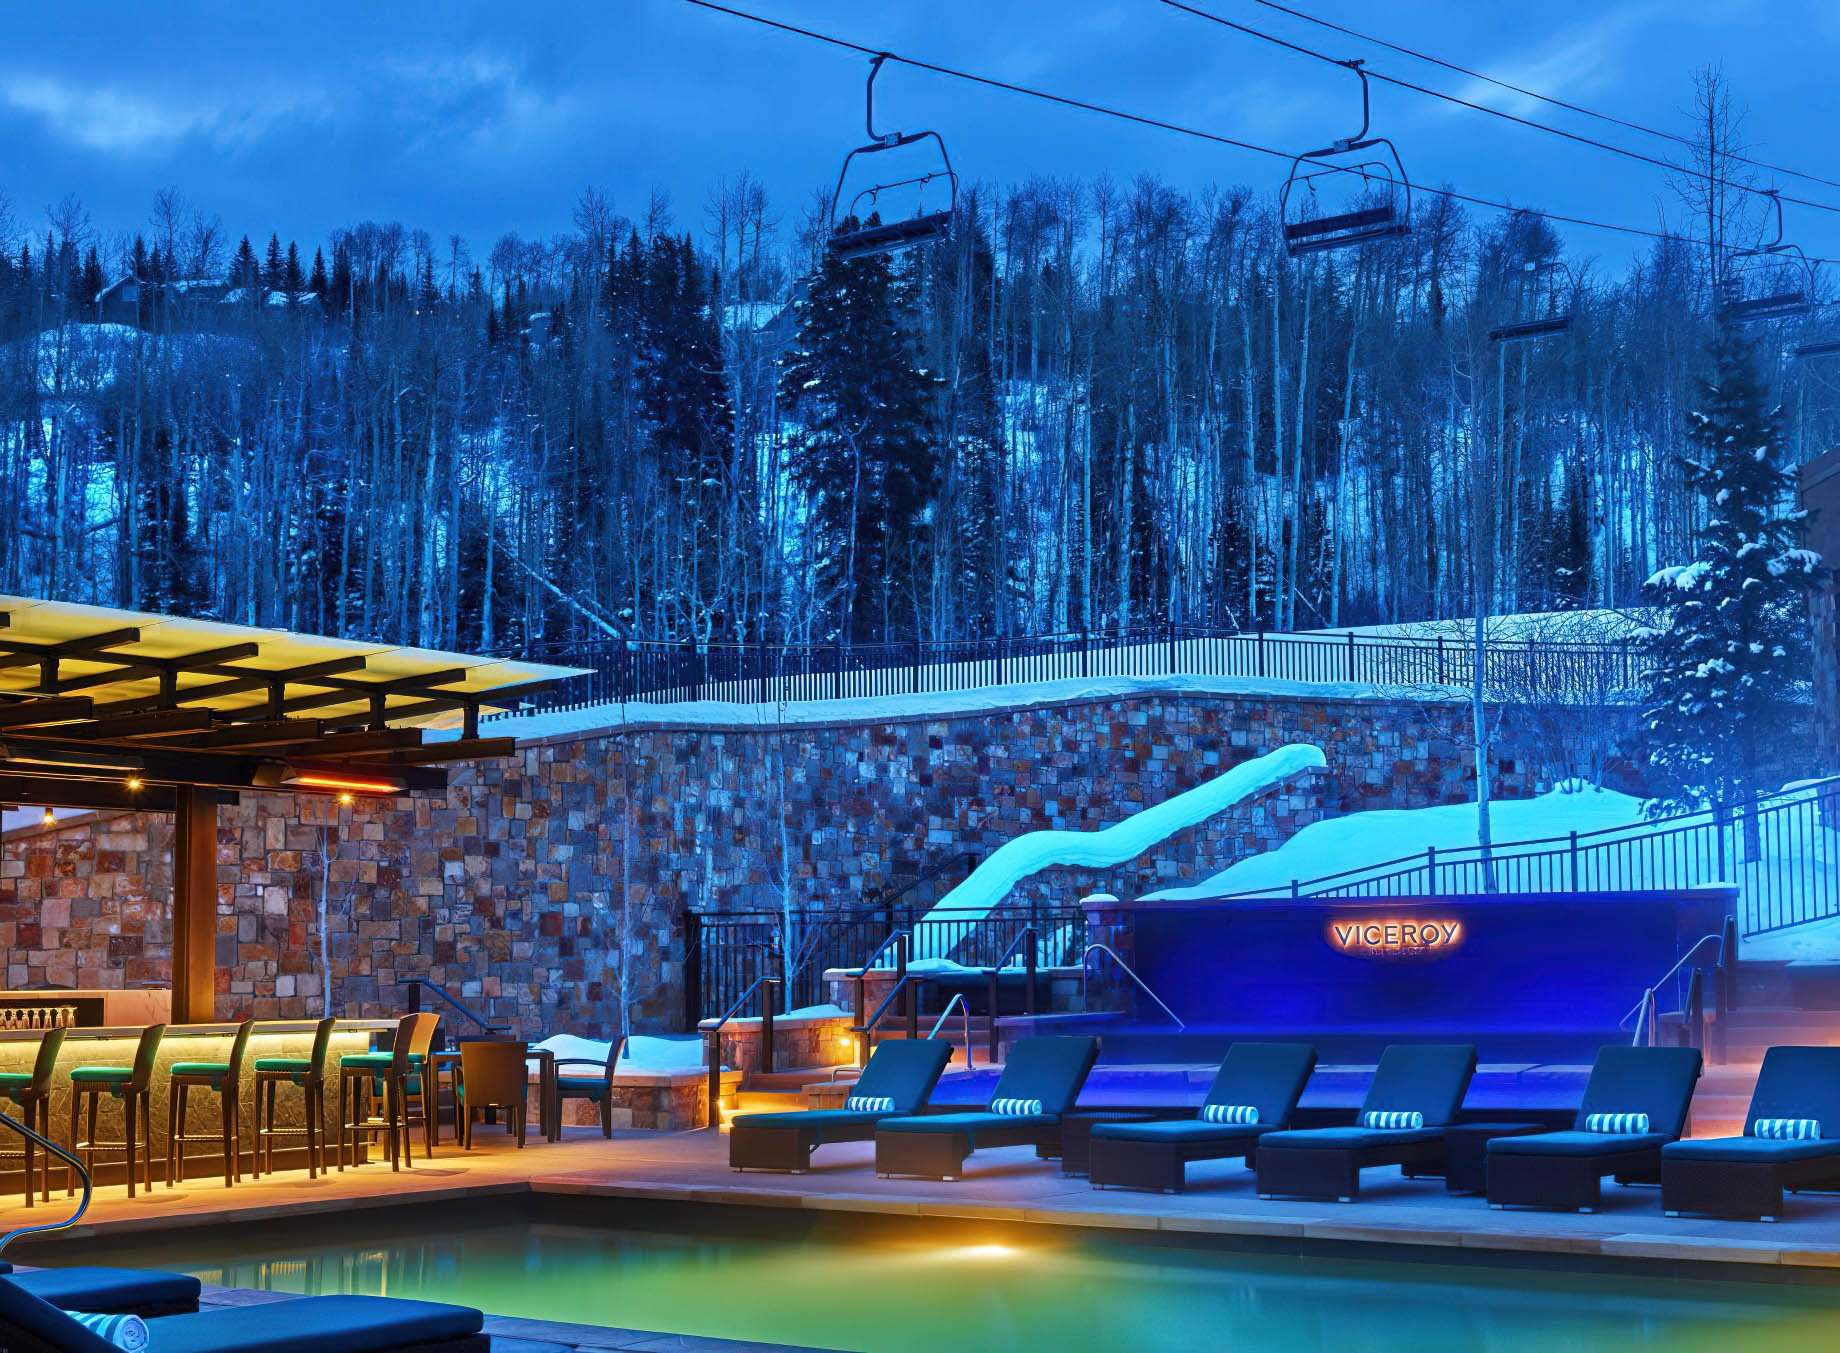 Viceroy Snowmass Luxury Resort - Aspen Snowmass Village, CO, USA - Night View of Pool Area in Winter